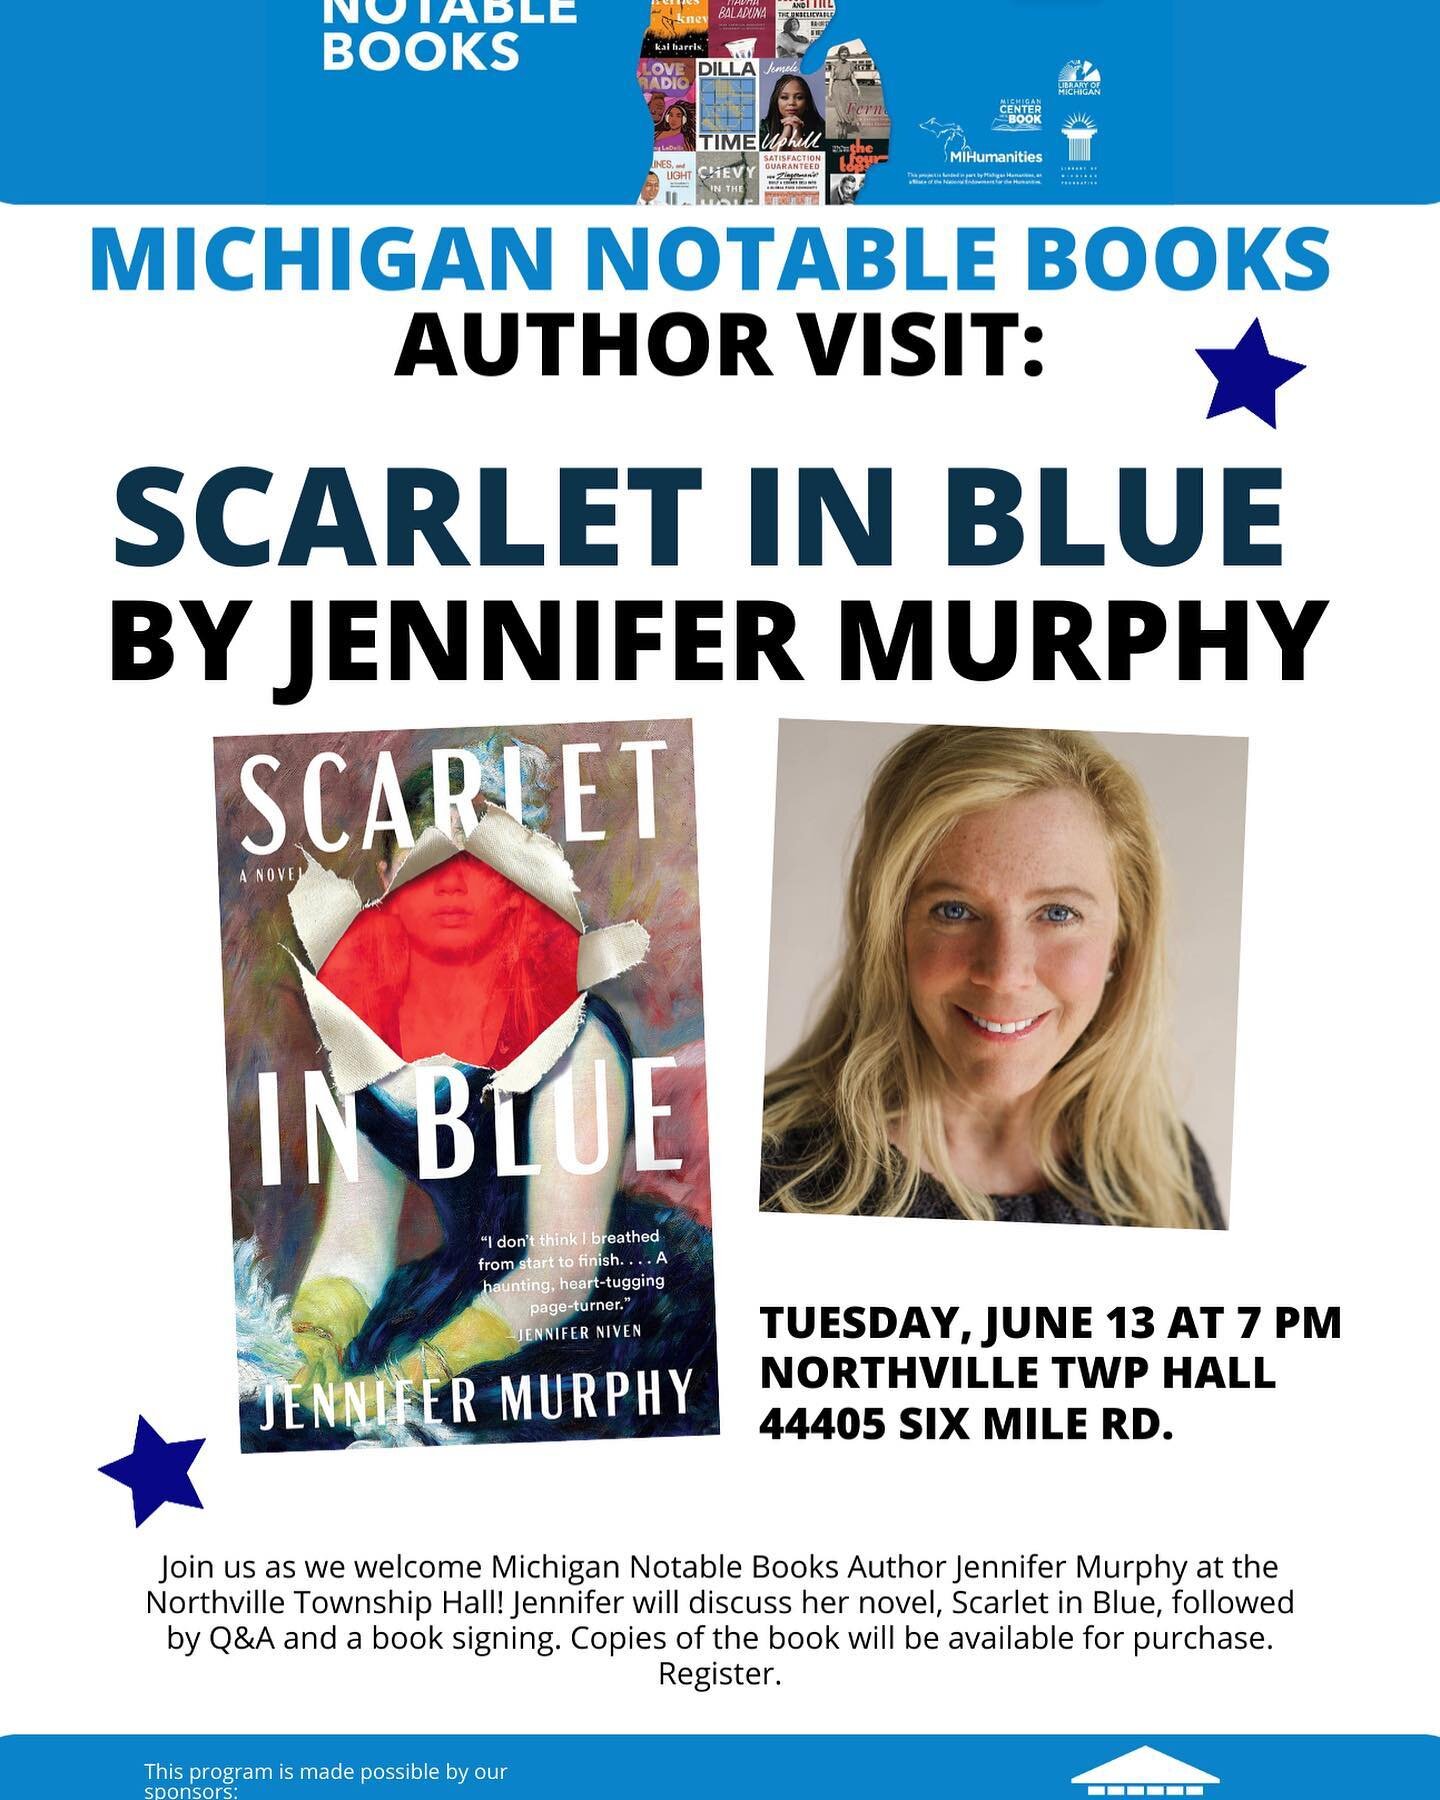 Please join me in Northville Michigan for @michigannotablebooks and the @libraryofmichigan! @duttonbooks @duttonpenguinrandomhouse #scarletinblue